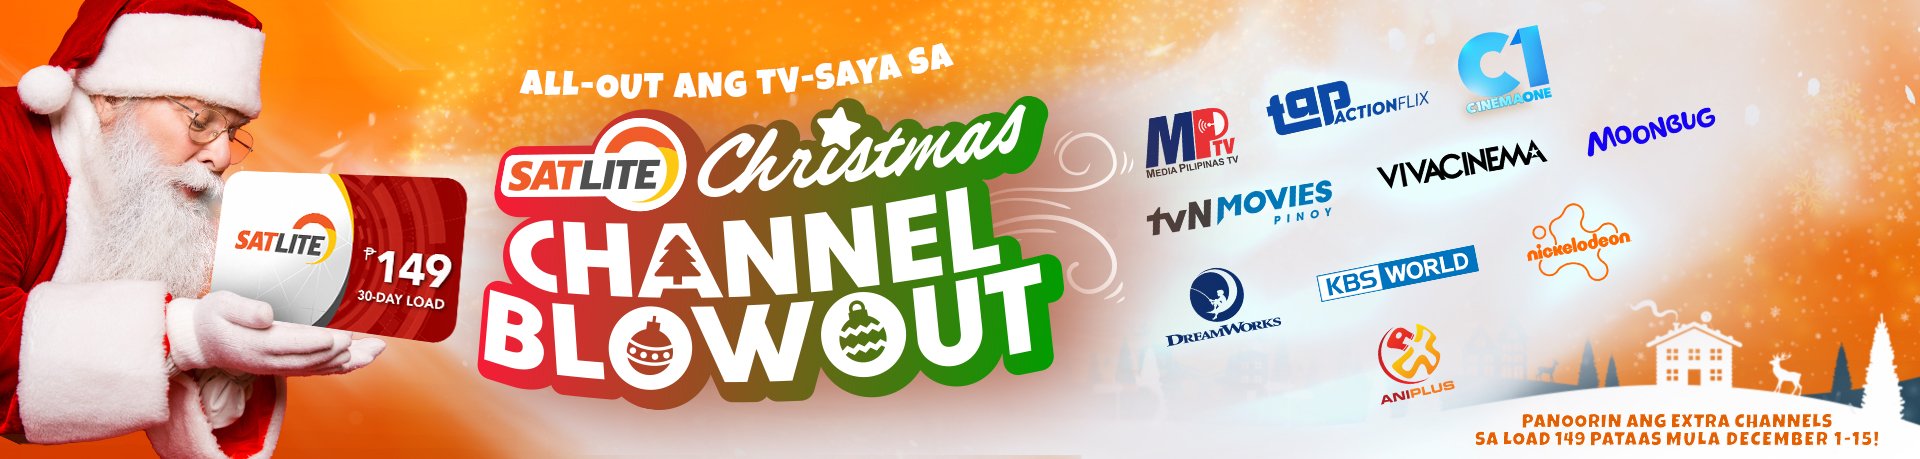 Christmas Channel Blowout BANNER